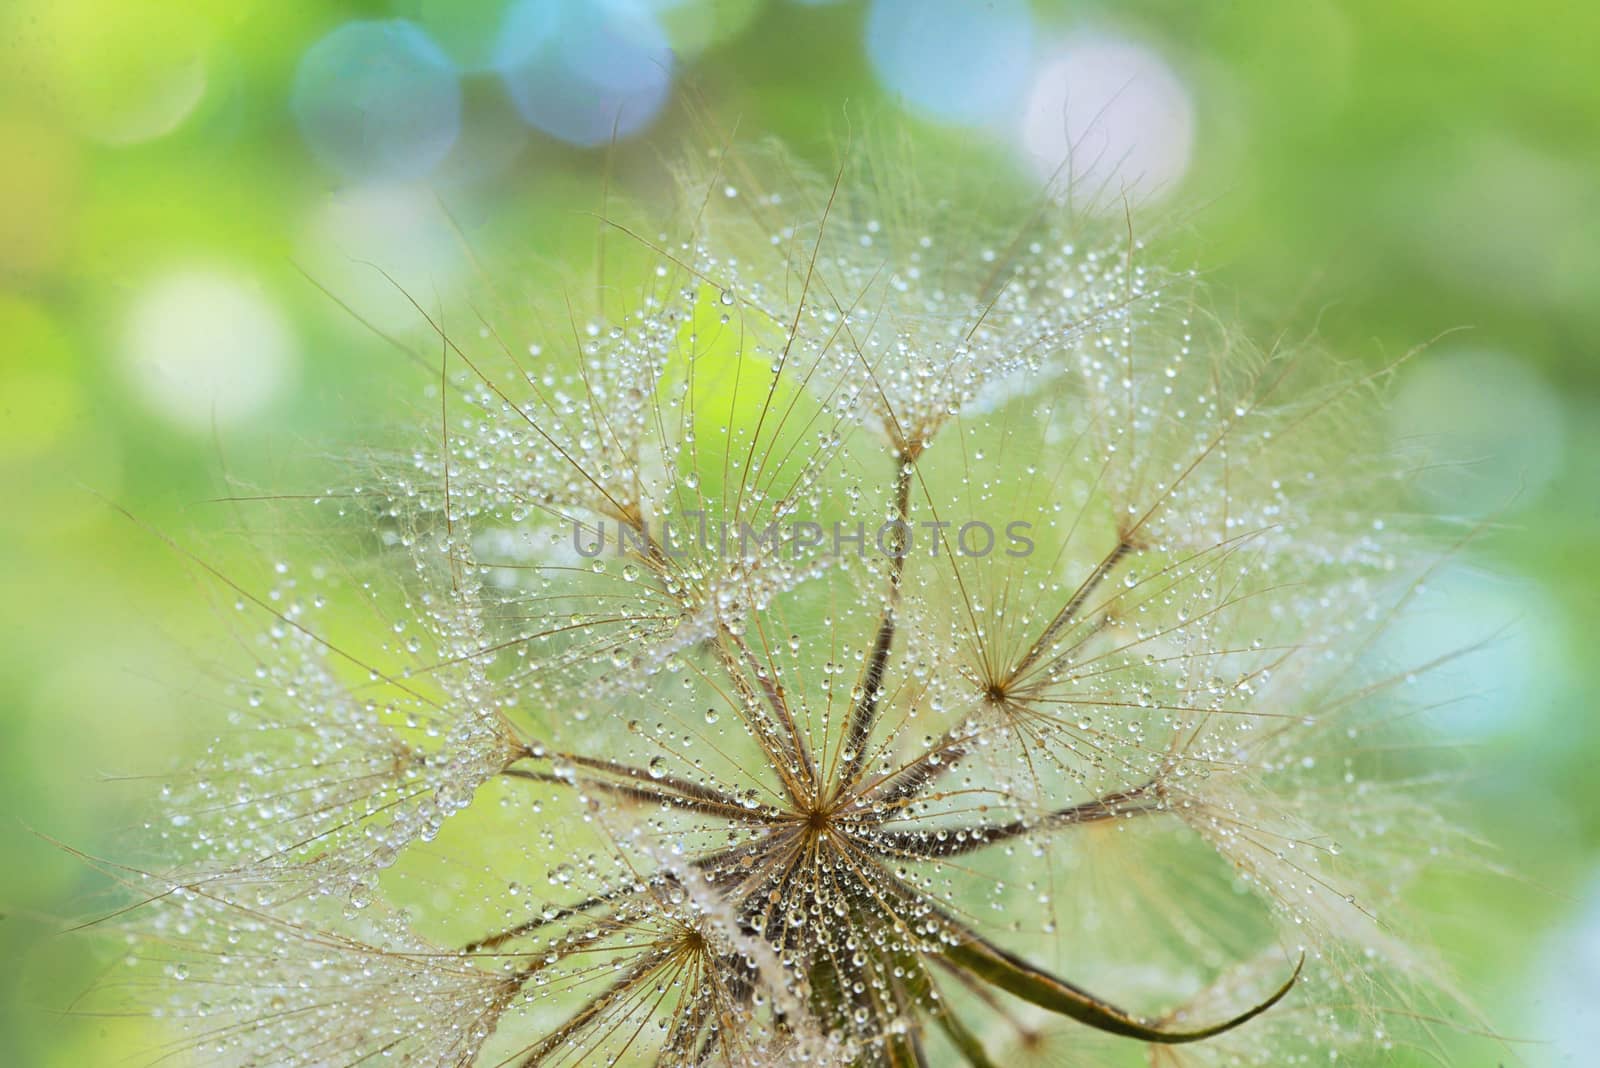 Dew drops on a dandelion seed by mady70